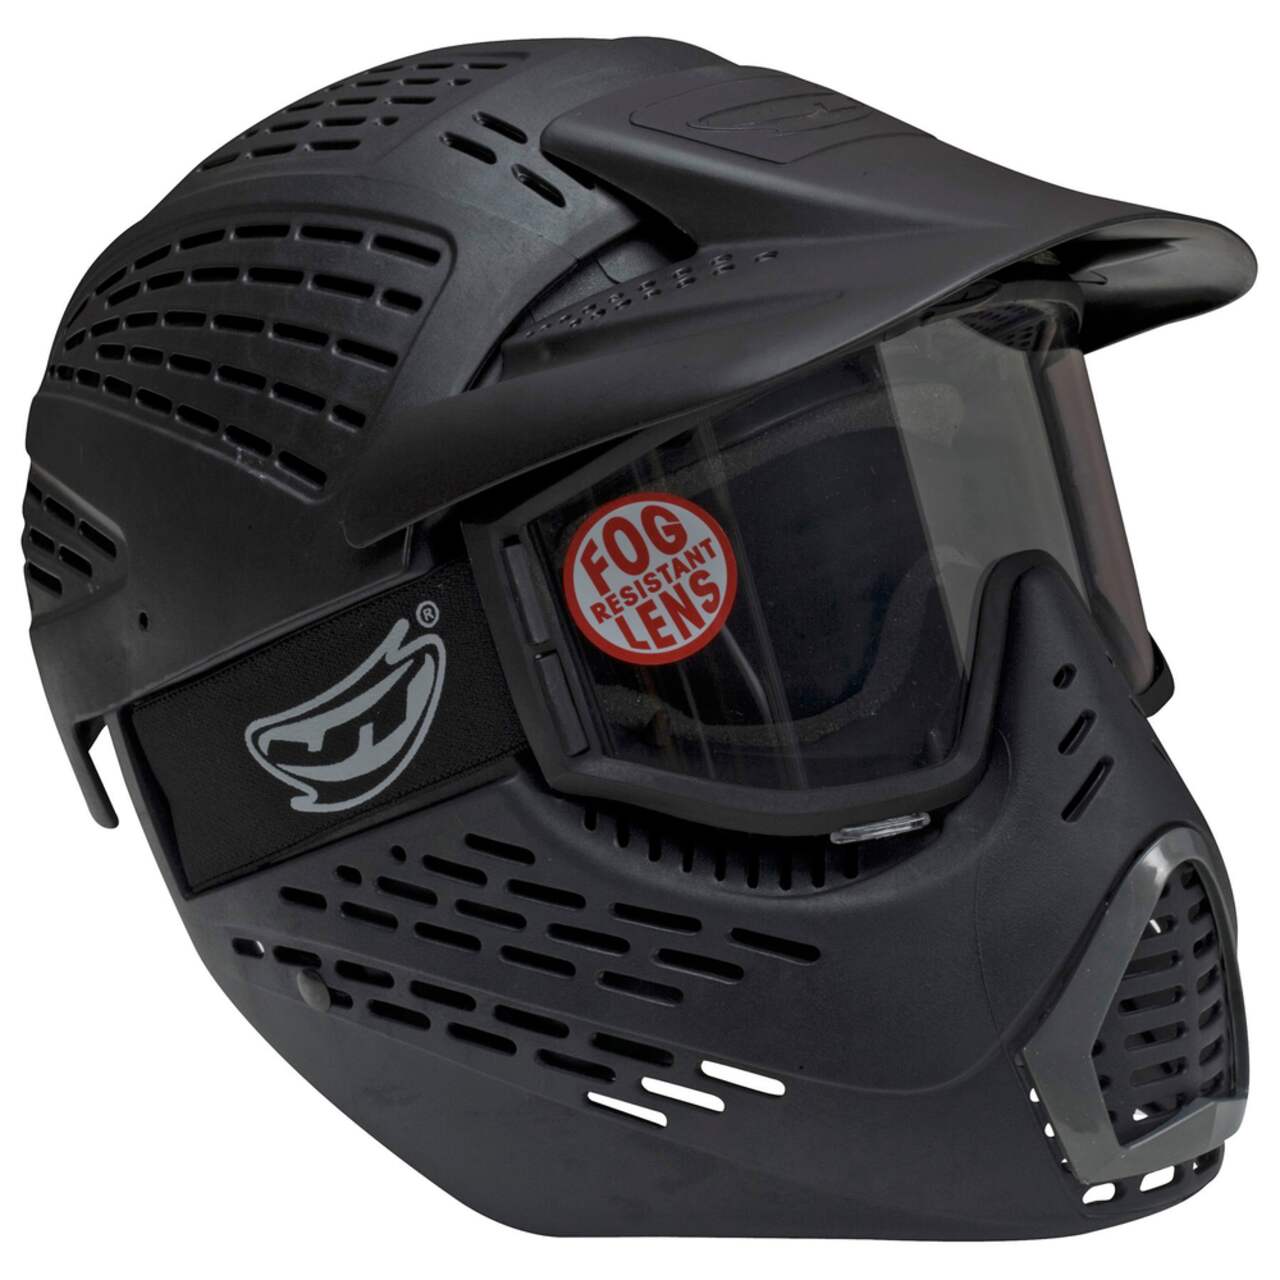 https://media-www.canadiantire.ca/product/playing/hunting/target-sports/0757039/paintball-headshield-mask-1c7db44f-d20f-4456-b070-0f445408f899.png?imdensity=1&imwidth=640&impolicy=mZoom